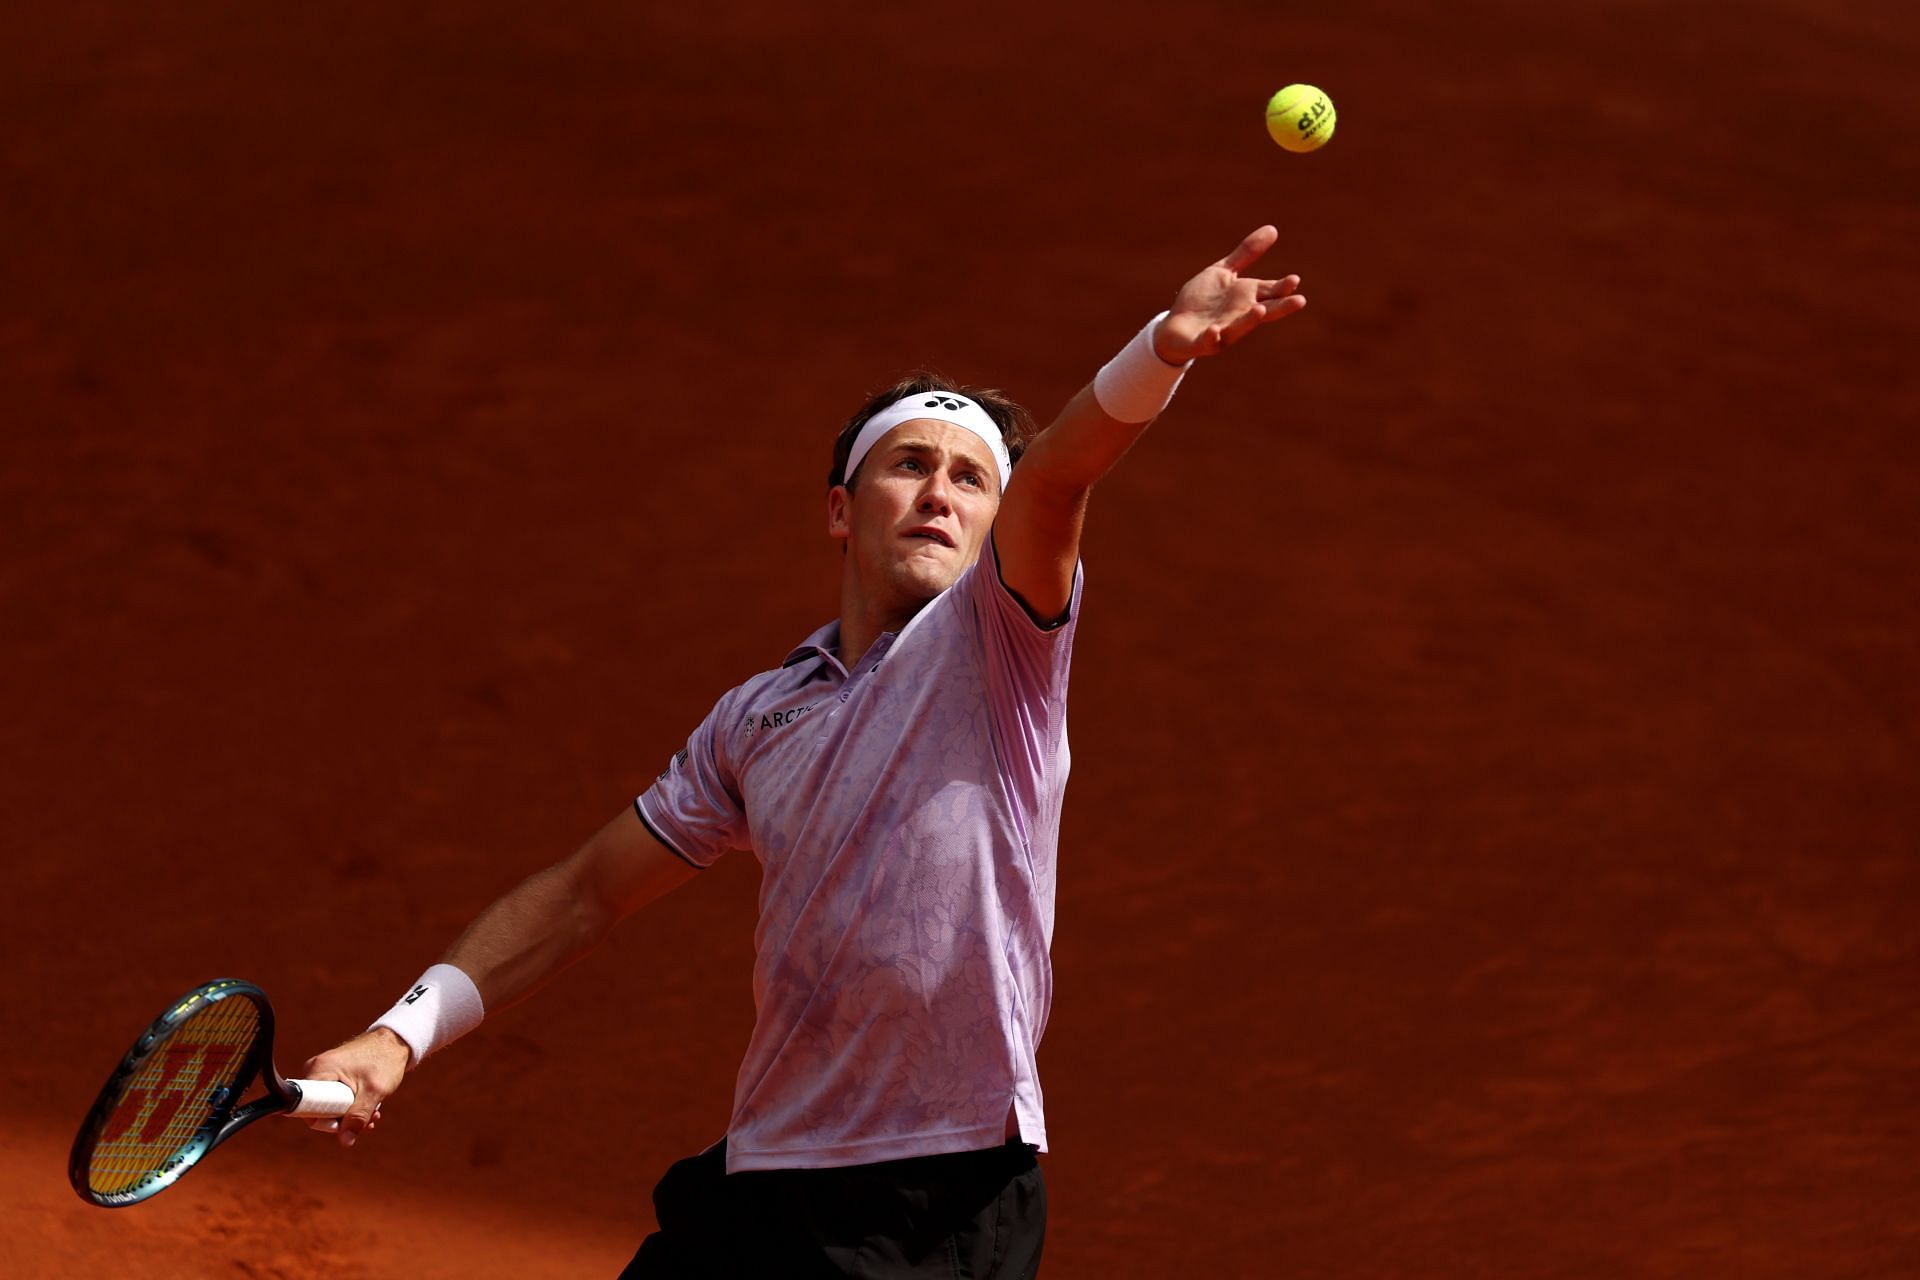 Casper Ruud in action at the Madrid Open